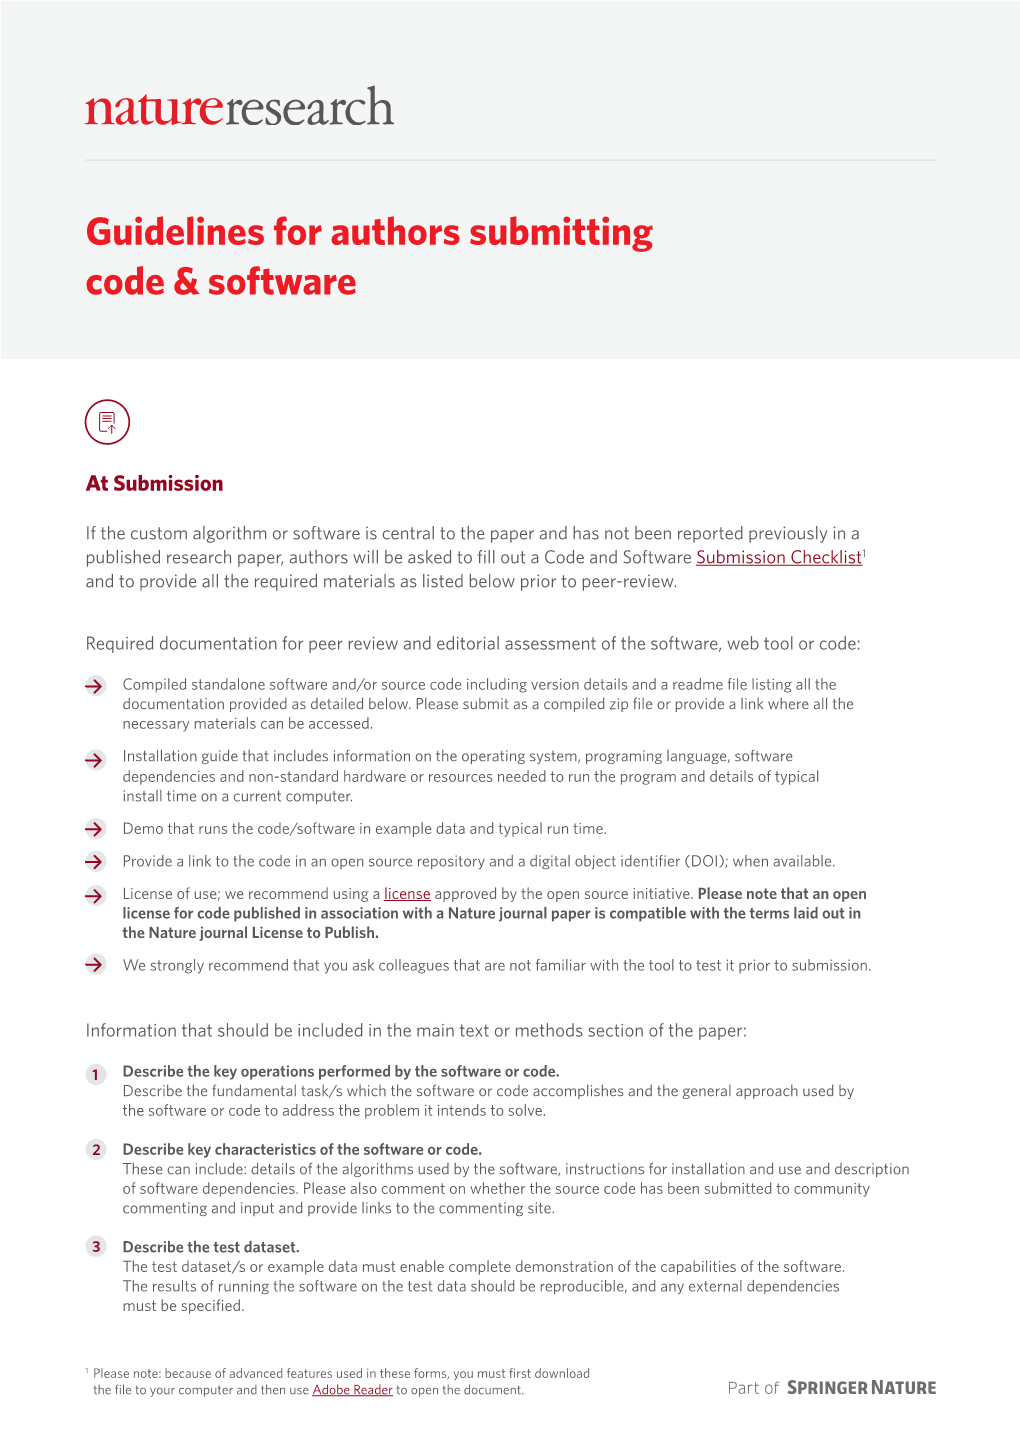 Guidelines for Authors Submitting Code & Software